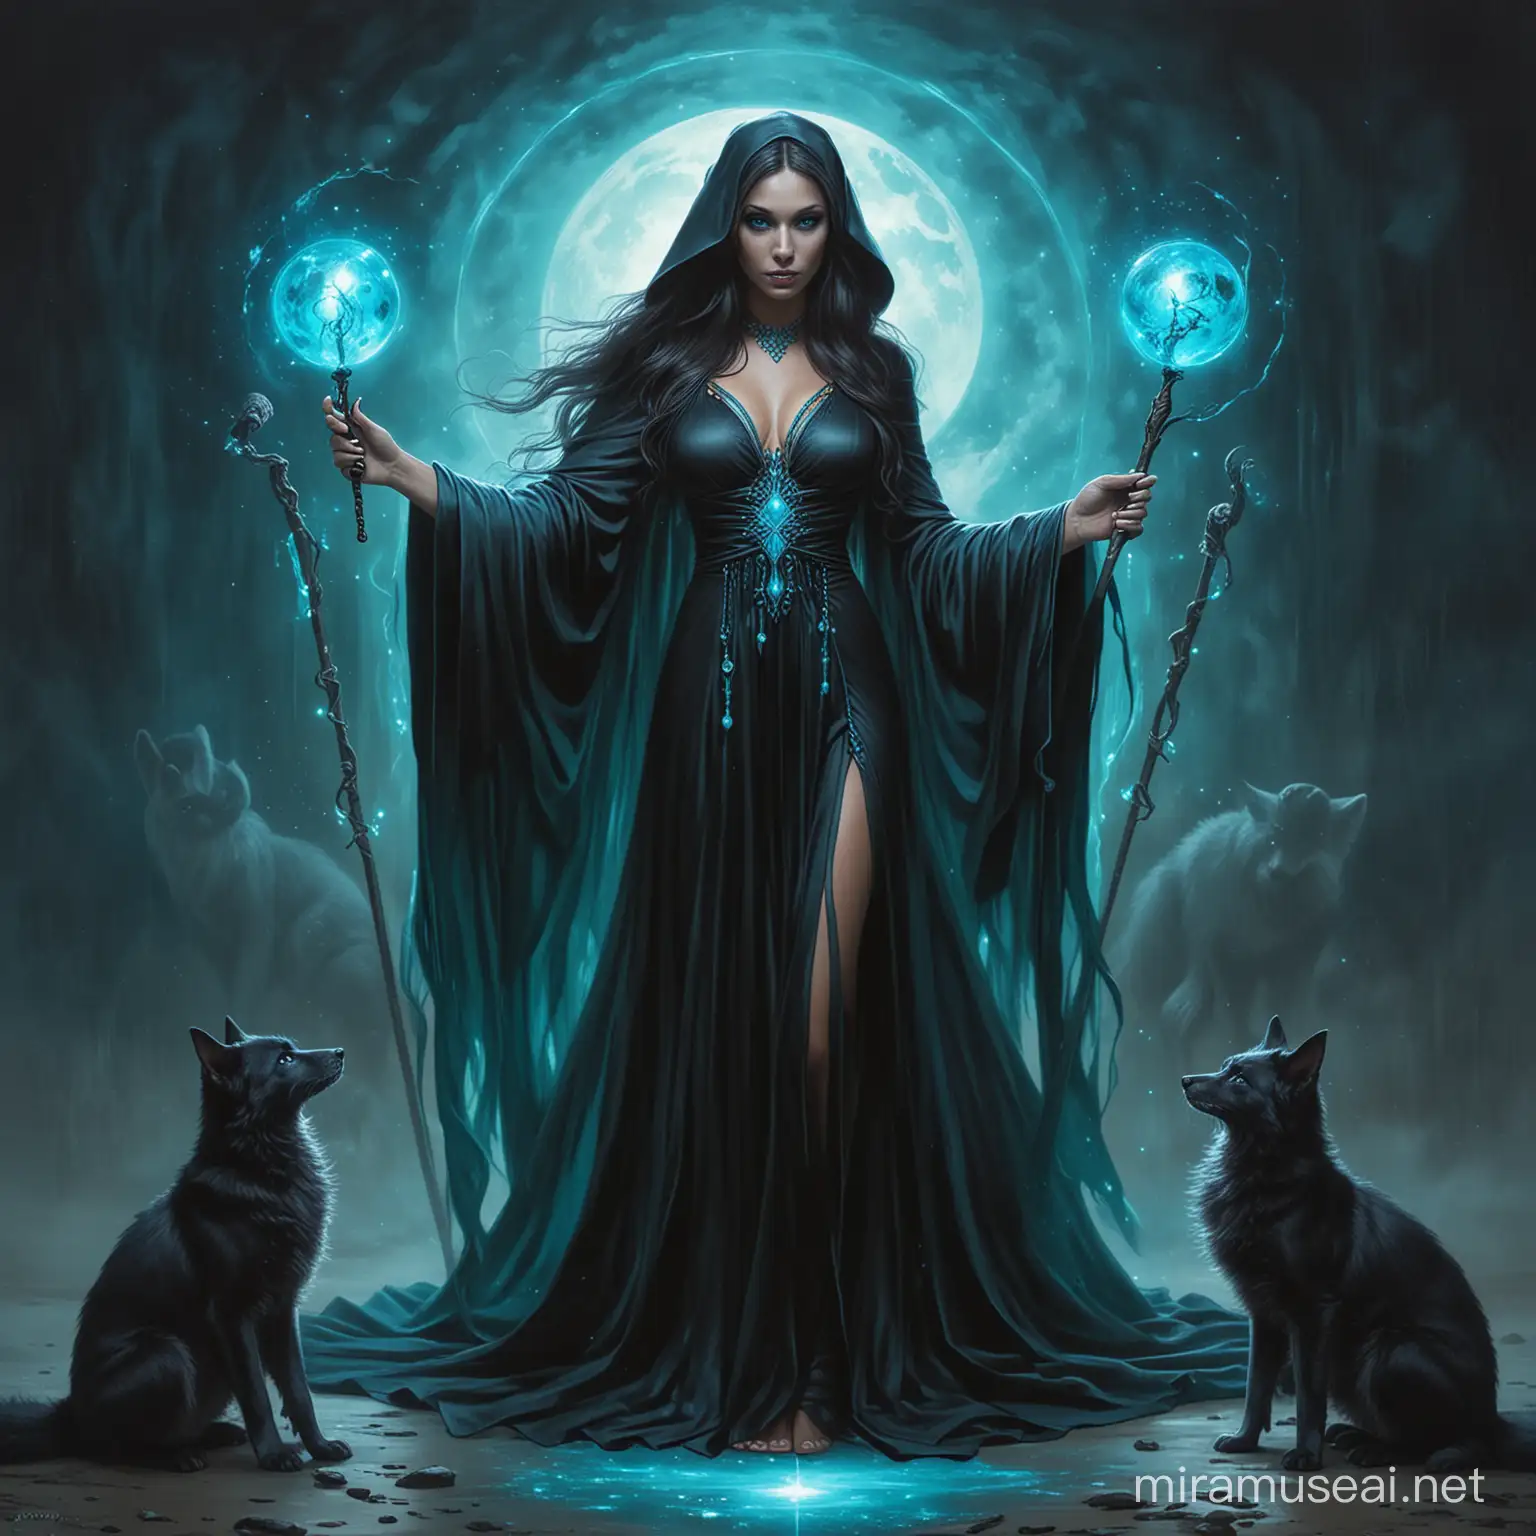 Dark Magic Goddess with Turquoise Orb and Vixens